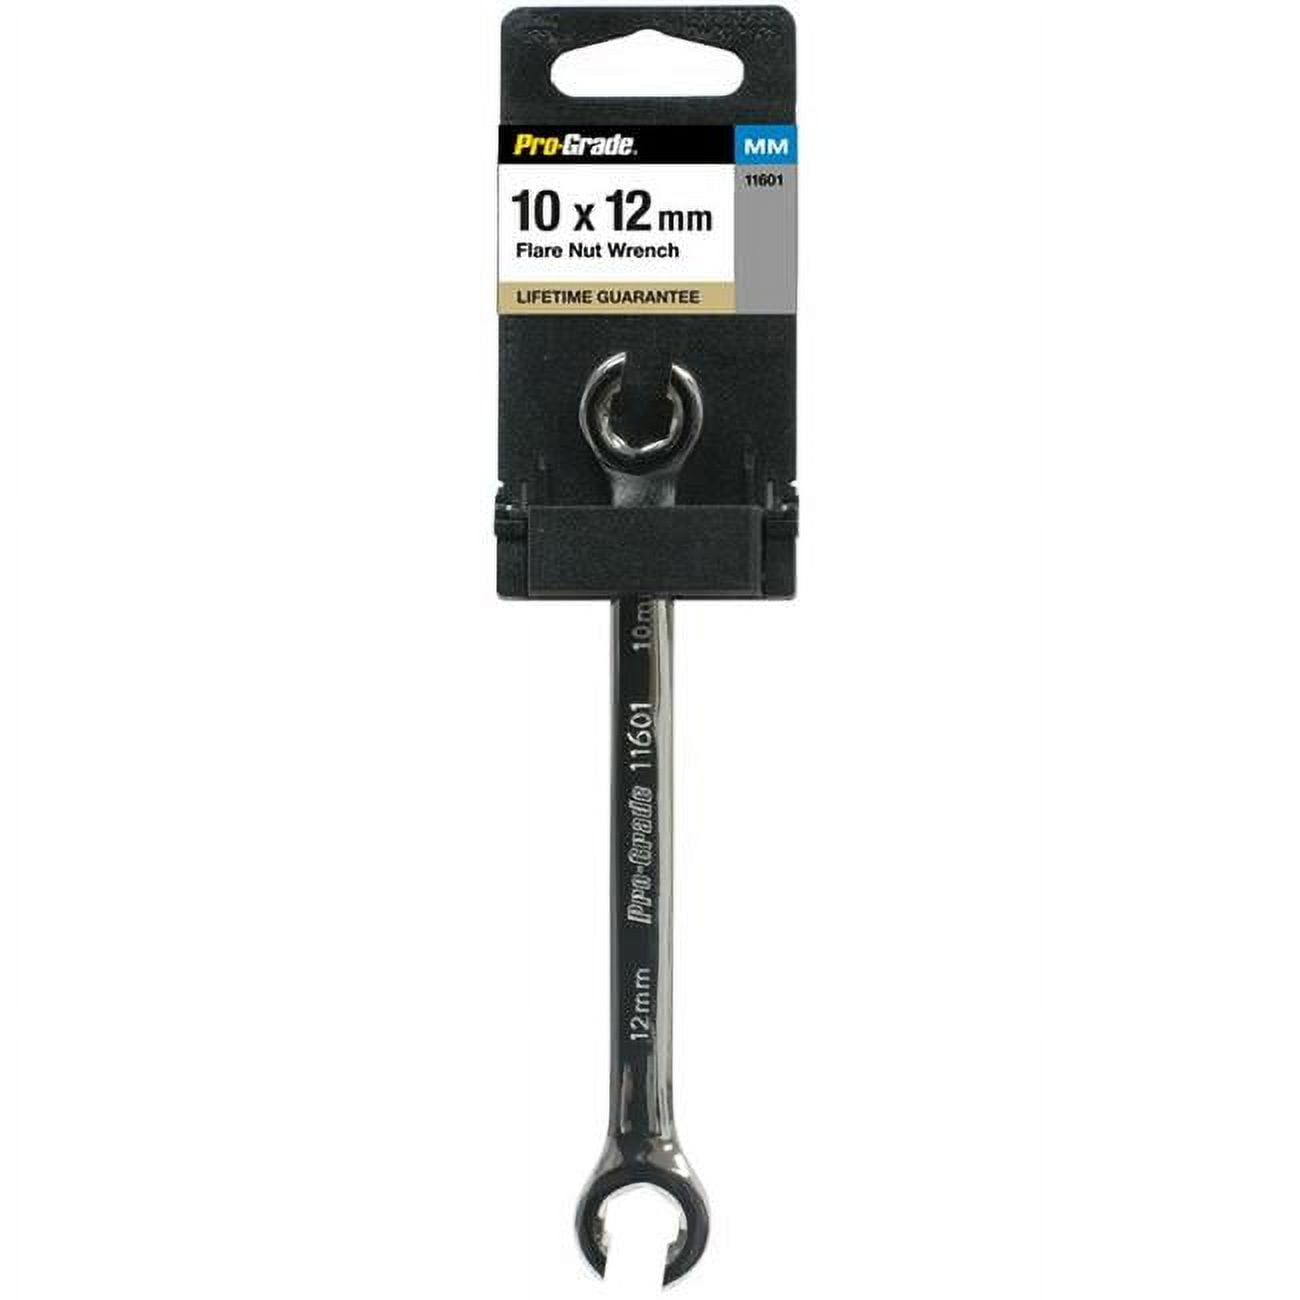 Picture of Pro-Grade 11601 10 x 12 mm Flare Nut Wrench